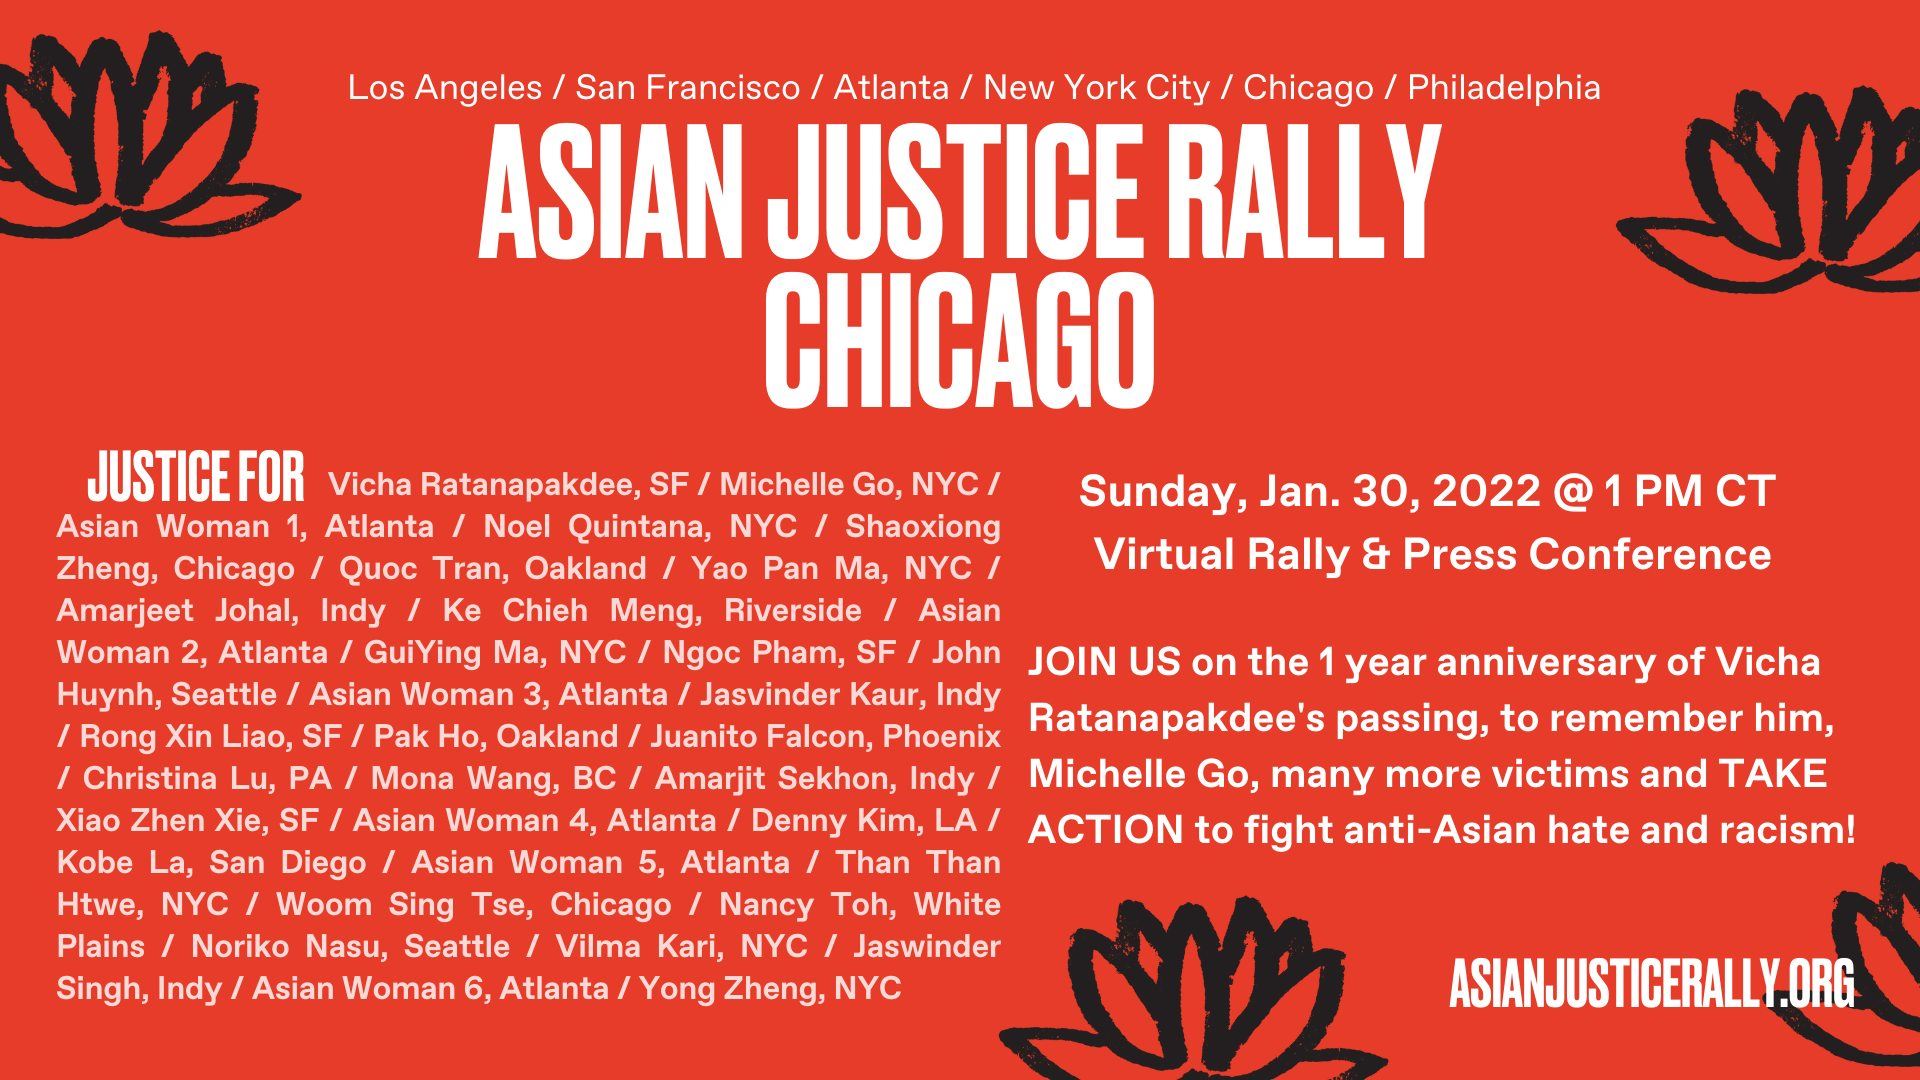 Asian Justice Rally Chicago